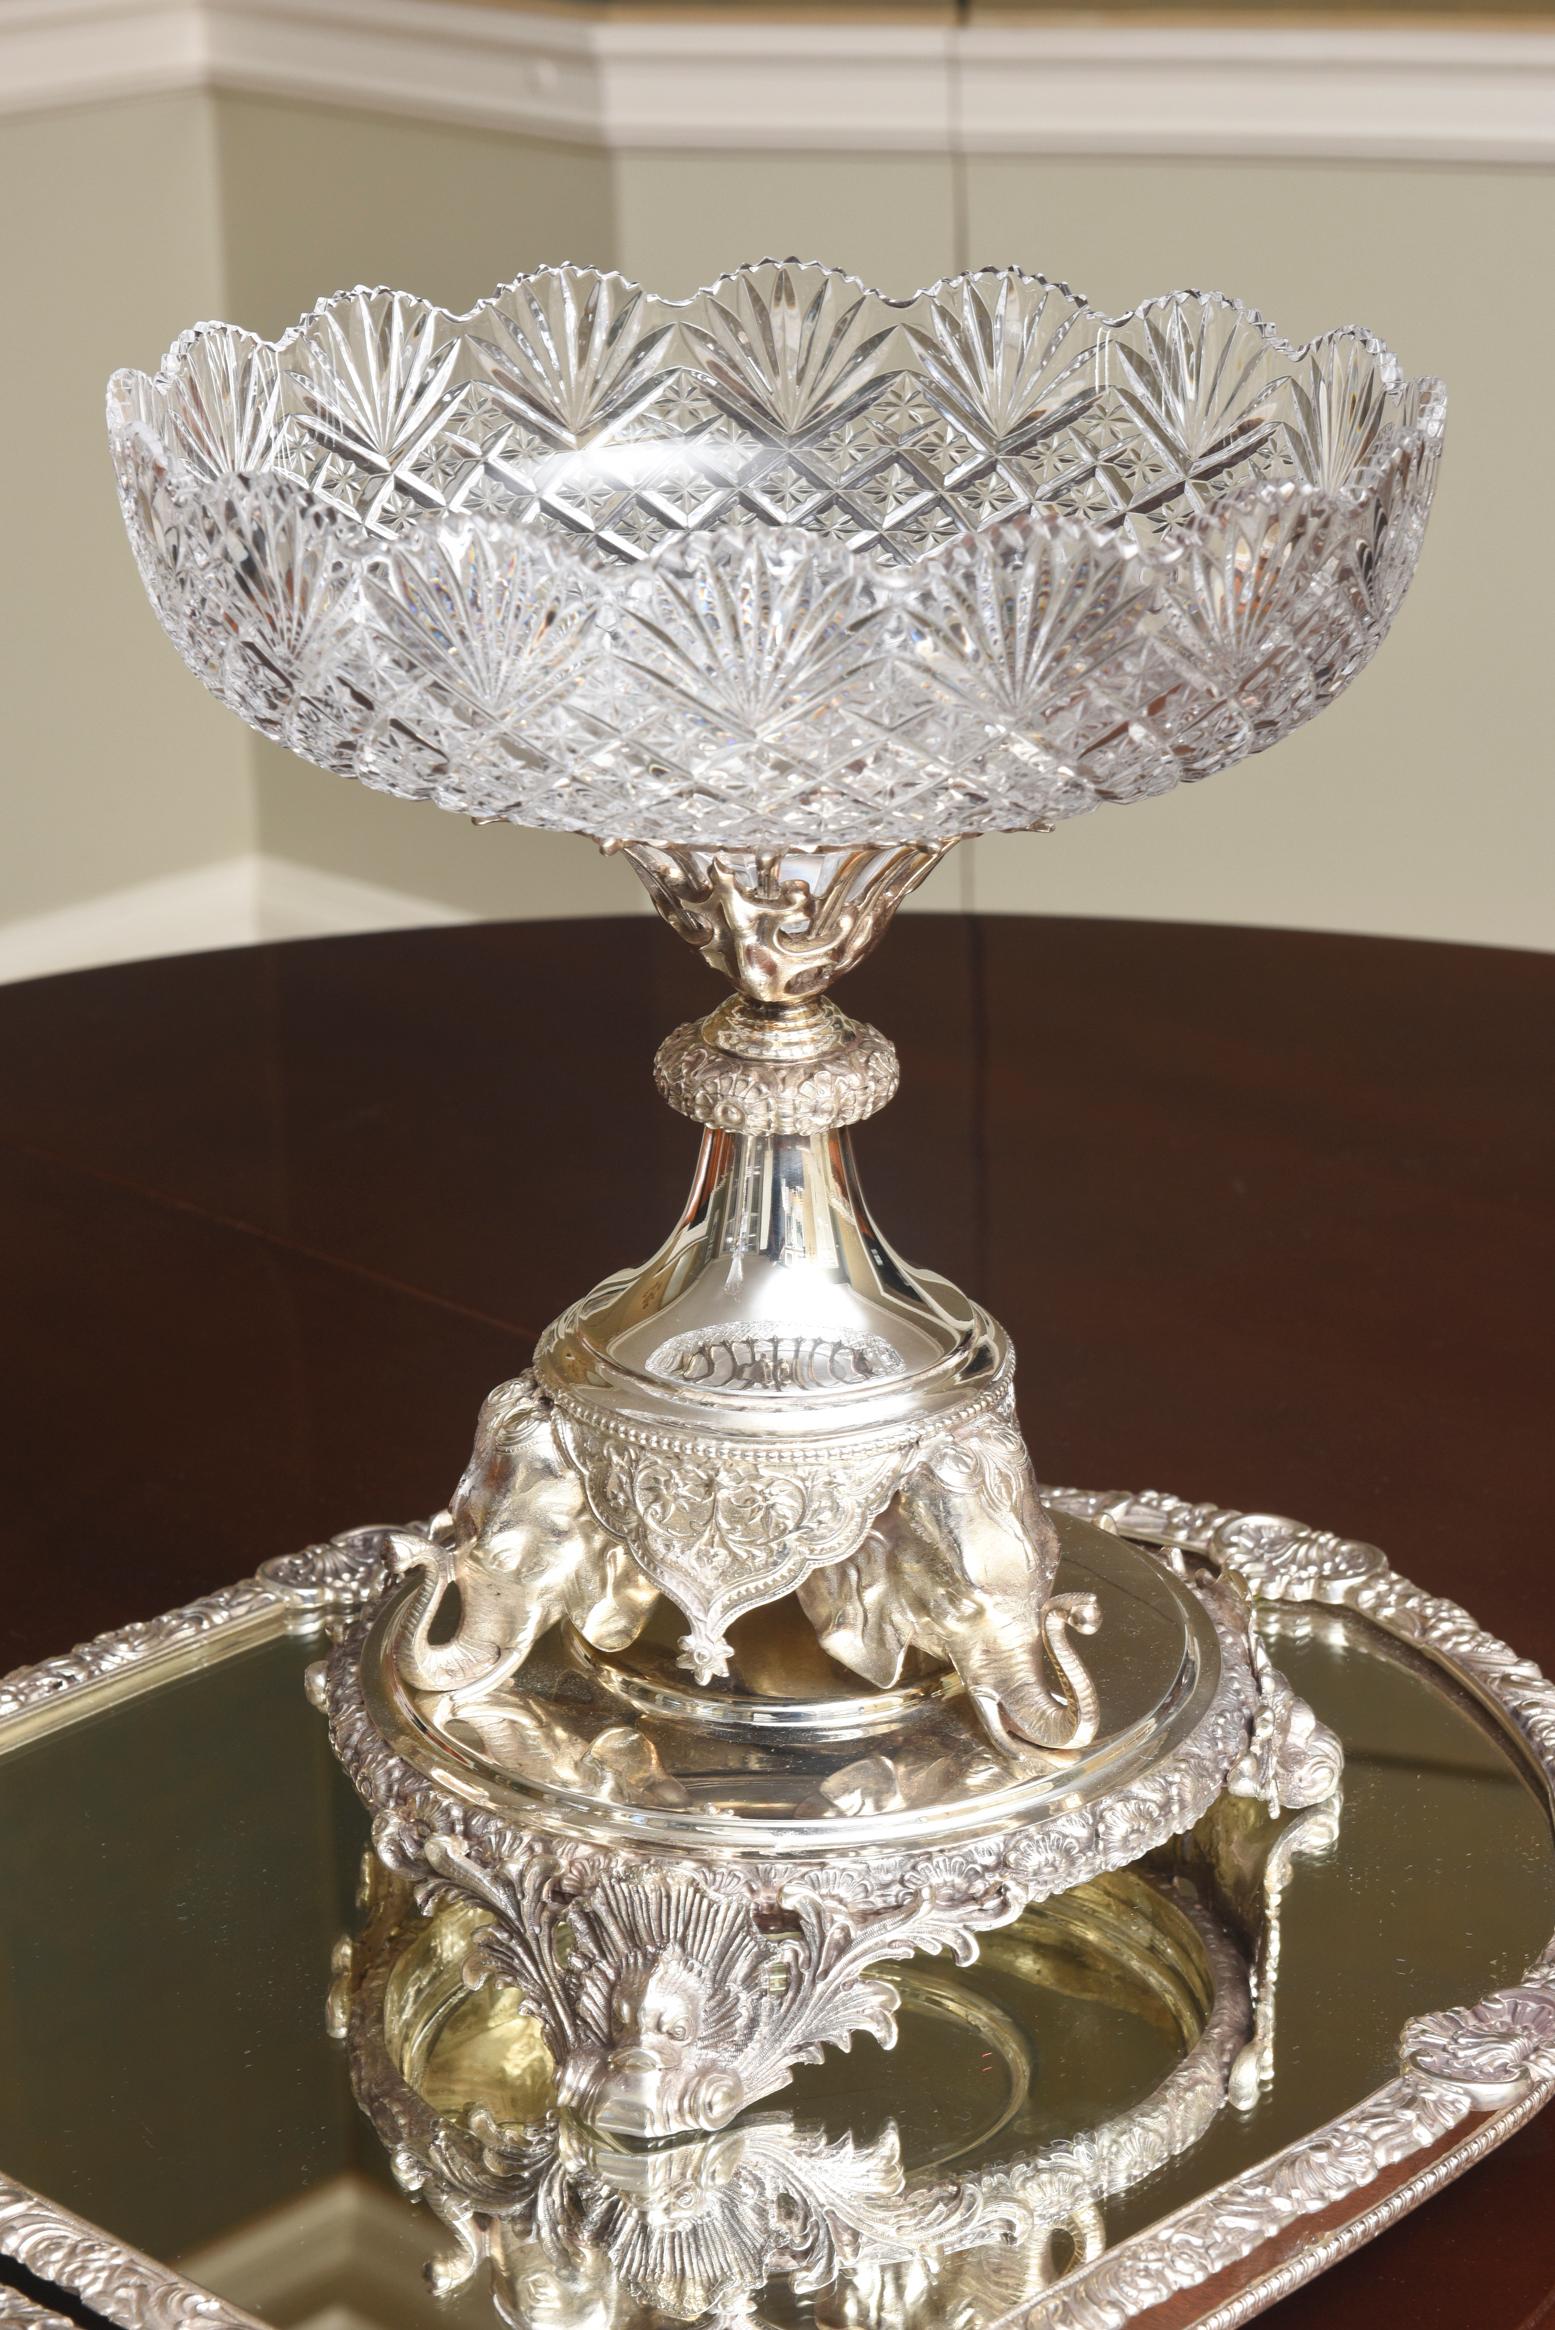 Early 20th Century Vintage Monumental Silver Plate and Cut Crystal Centerpiece with Mirror Plateaus